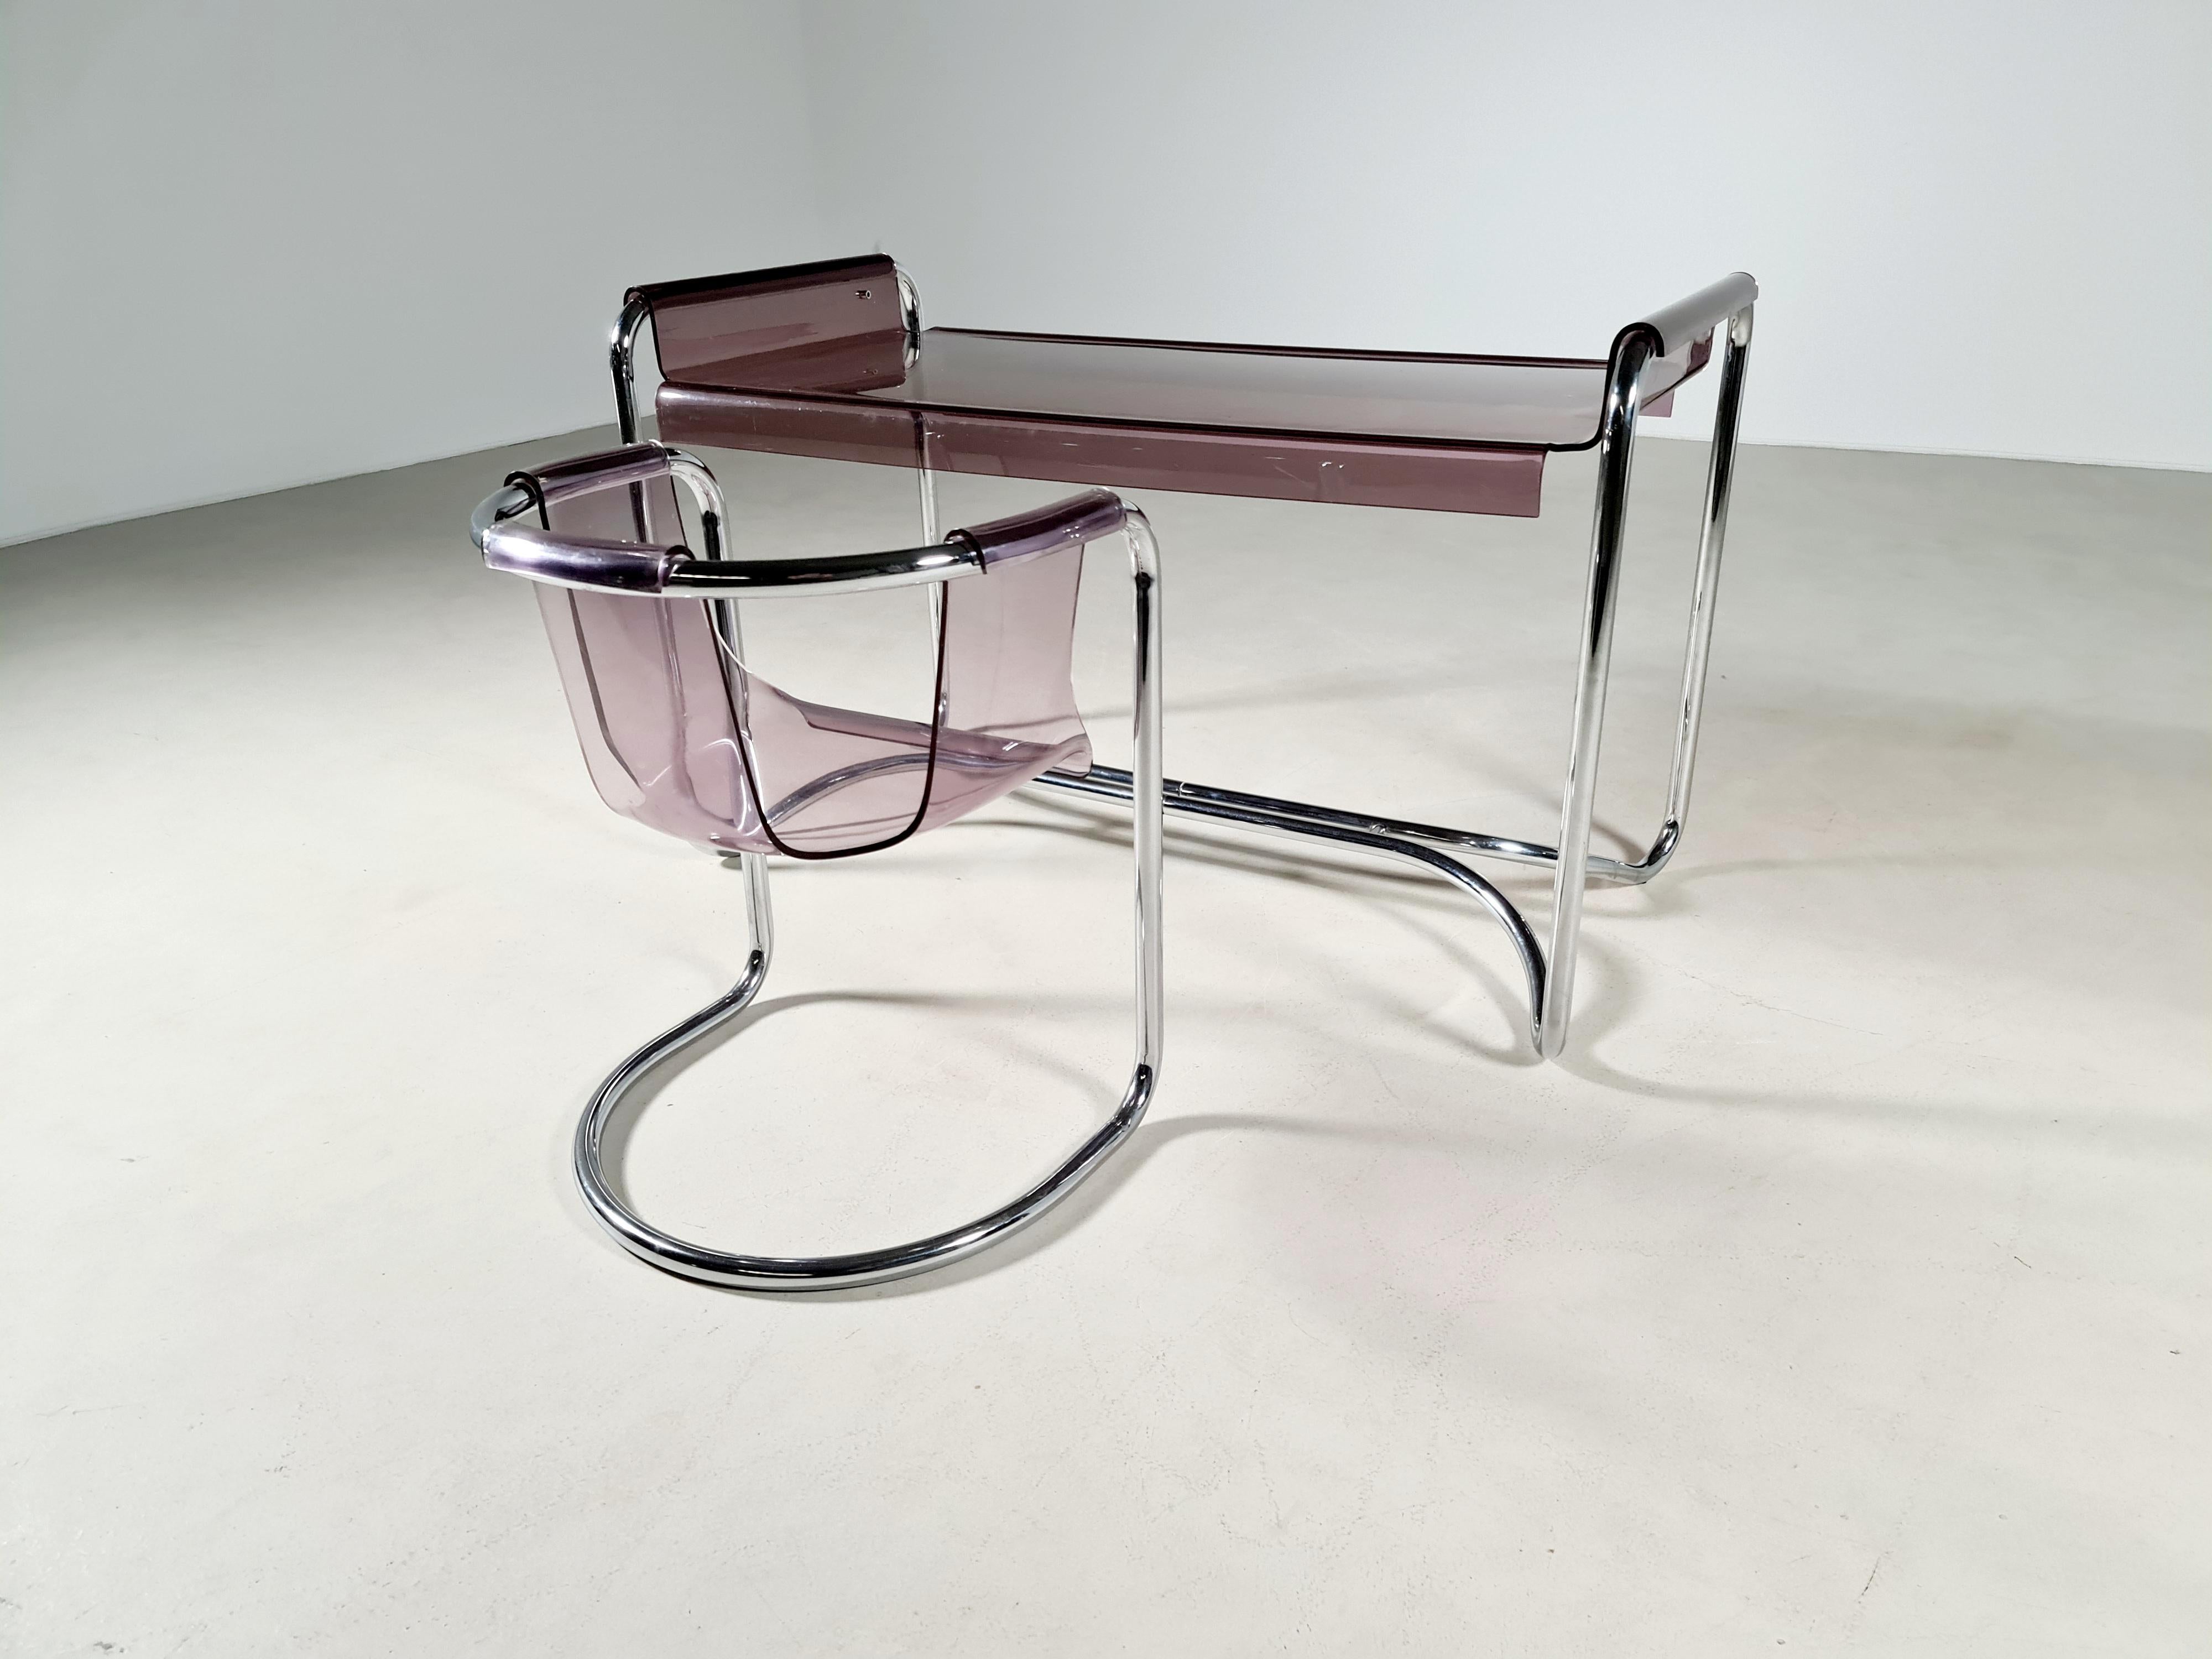 Rare Fabio Lenci desk with matching chair. Produced by Formes Nouvelles Paris, 1970s. Chrome frame with a floating Lucite top. Frames are Chromed metal, both desk and chair have the original removable Lucite top and seat.